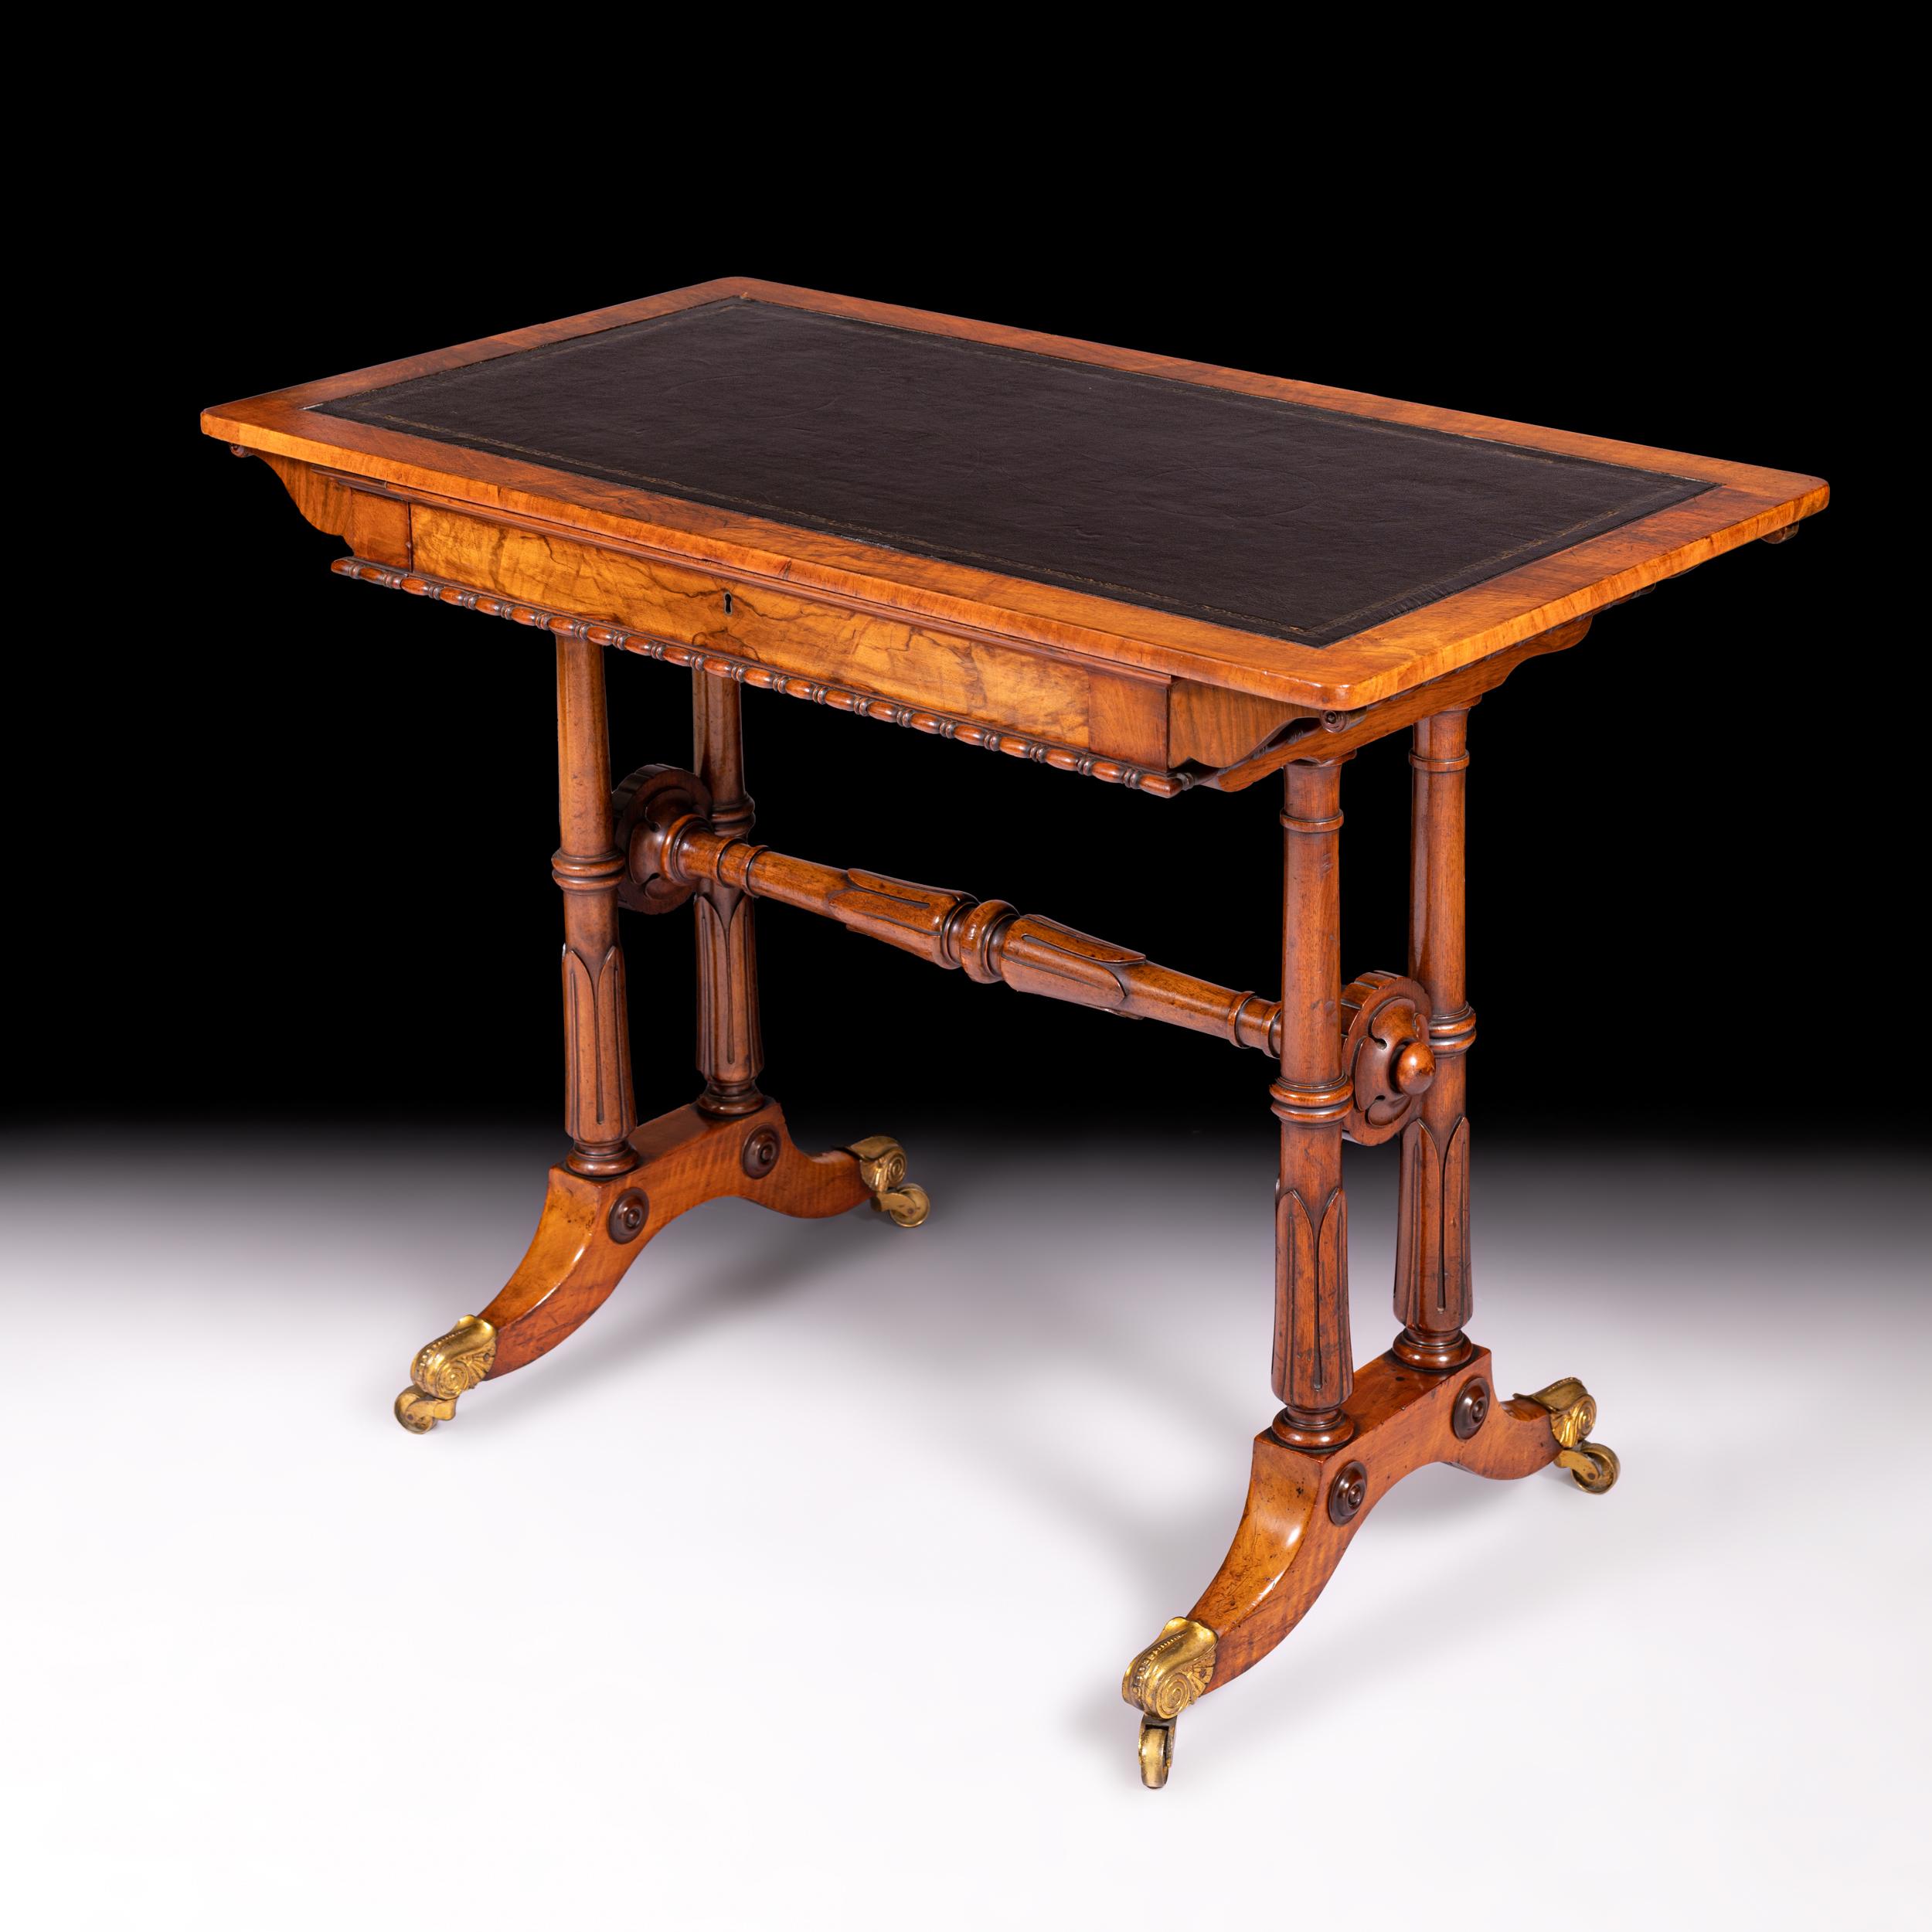 A George IV walnut rectangular writing table, the top with inset leather scriver above a shaped frieze drawer, raised on pairs of turned side supports with lotus collars and stretchers, on outswept legs with brass toe caps and castors.

Circa